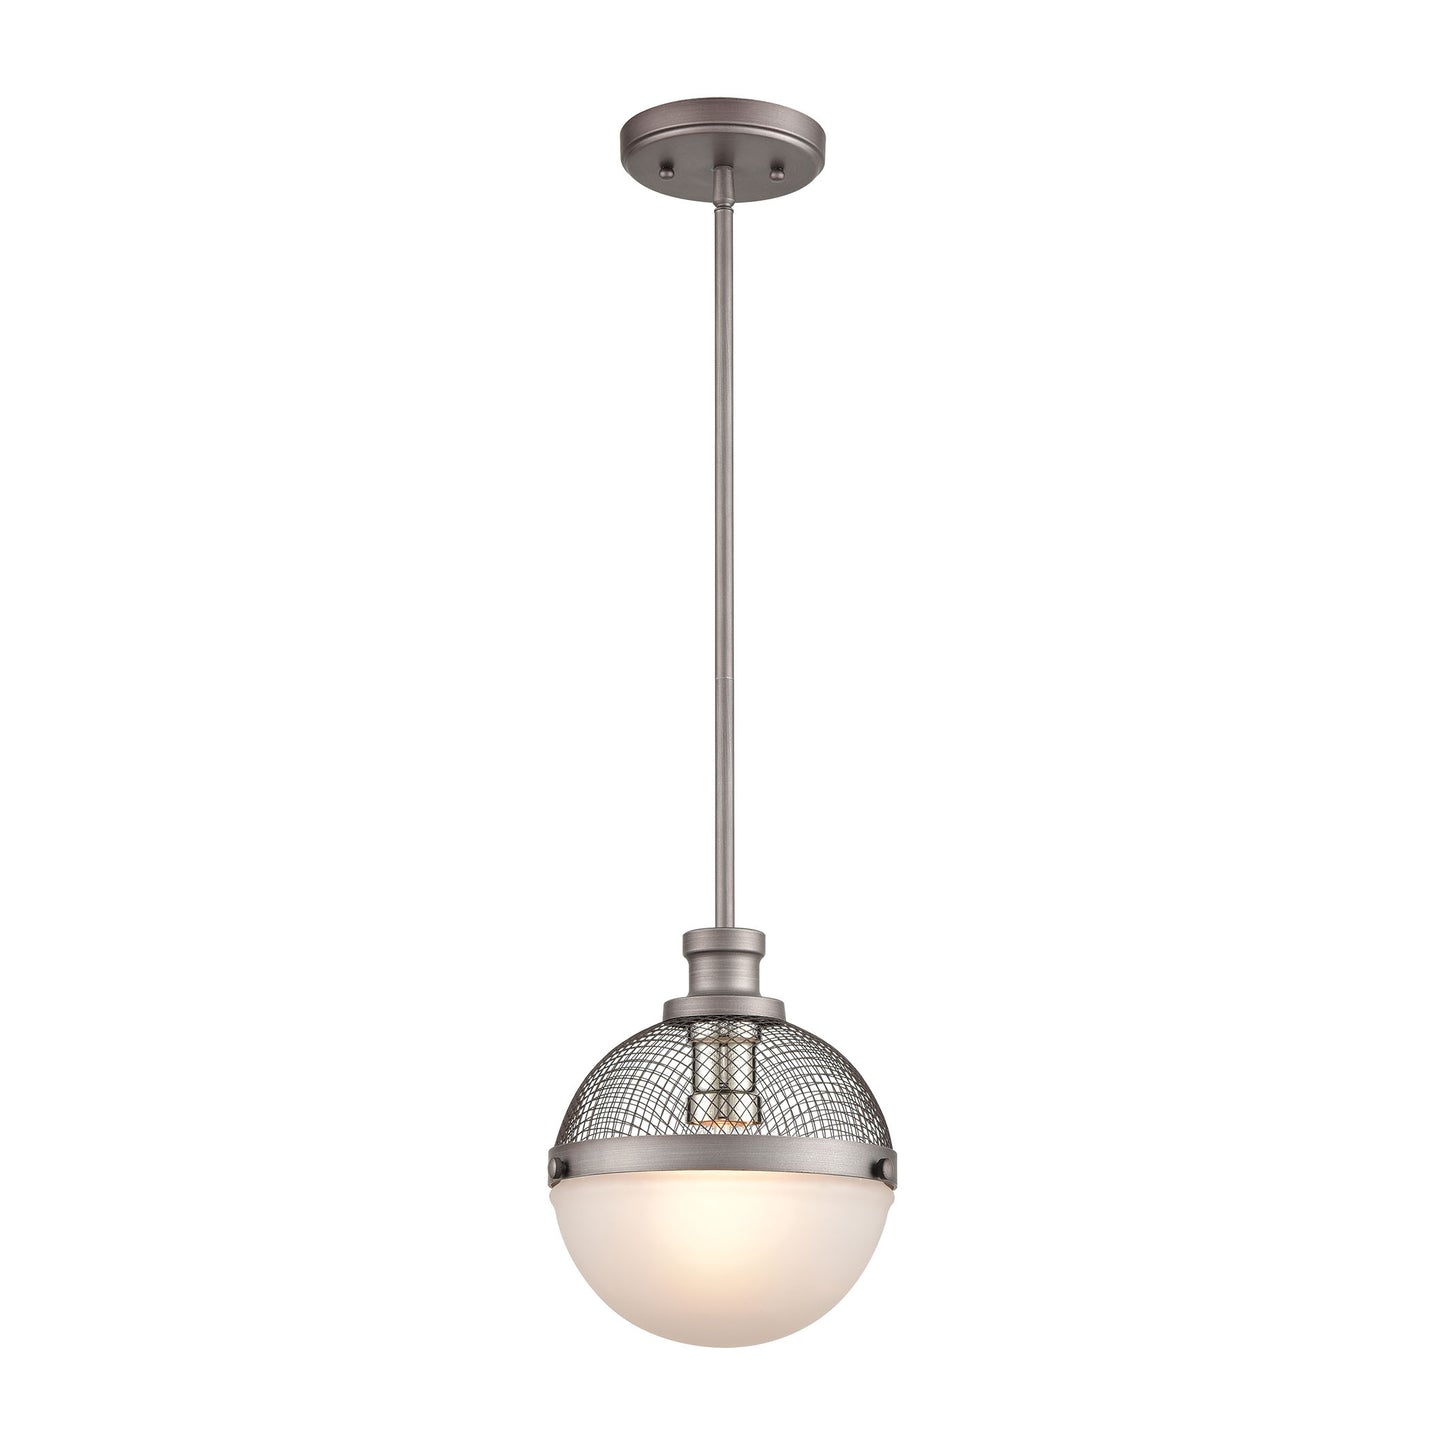 ELK Lighting 15555/1 - Calabria 9" Wide 1-Light Mini Pendant in Weathered Zinc and Polished Nickel w